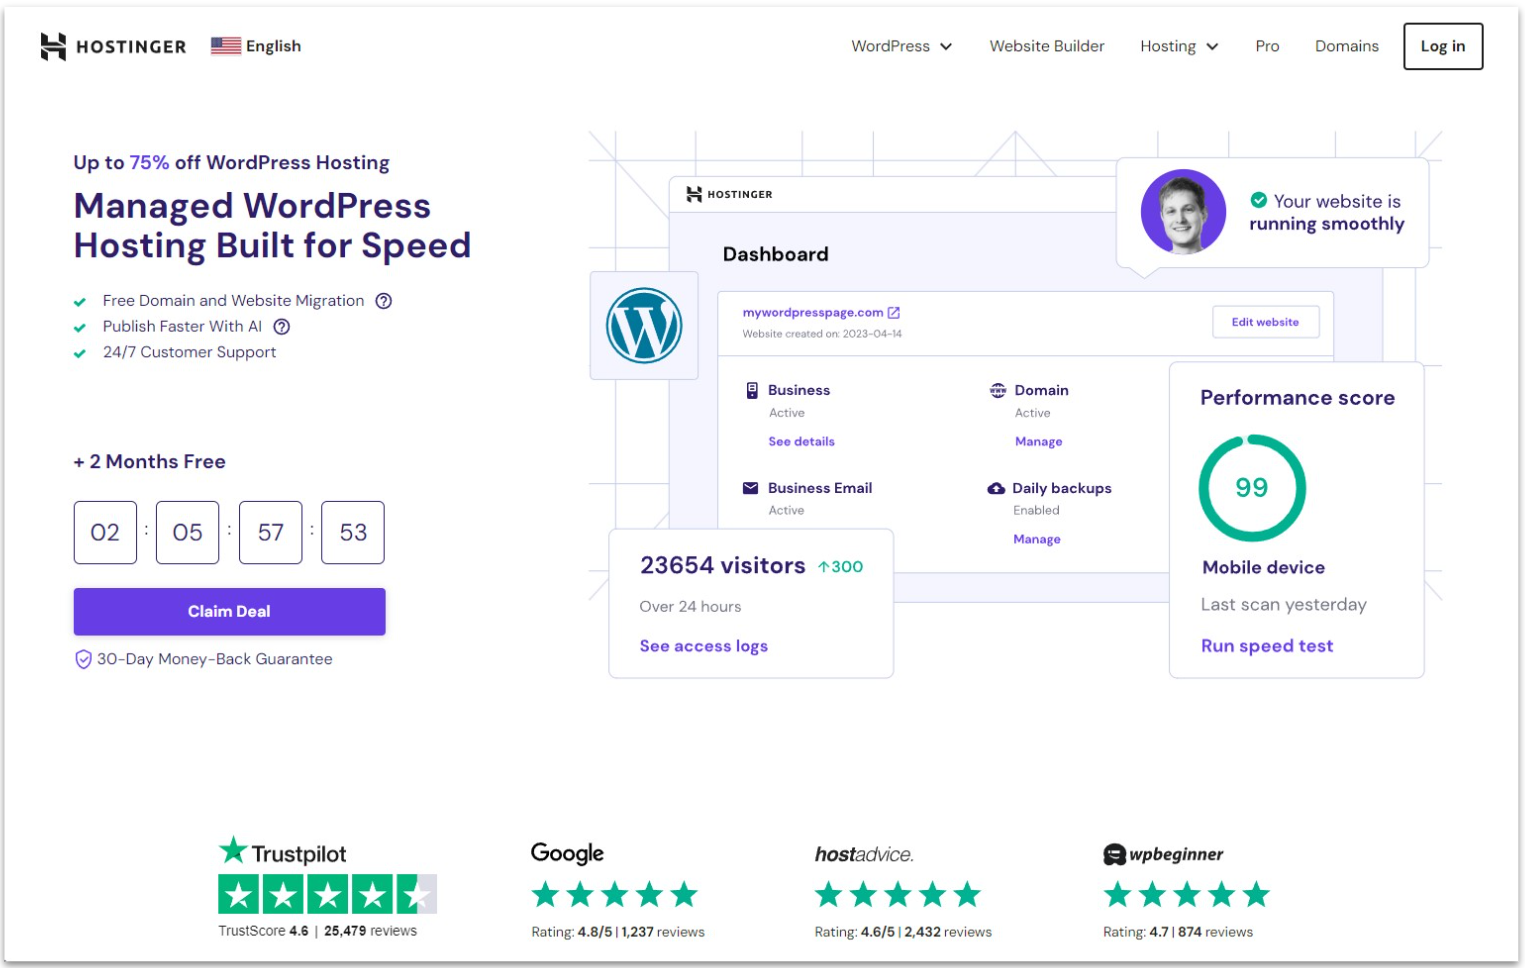 Hostinger WordPress hosting landing page with an image of its hPanel dashboard, customer ratings, and special offers